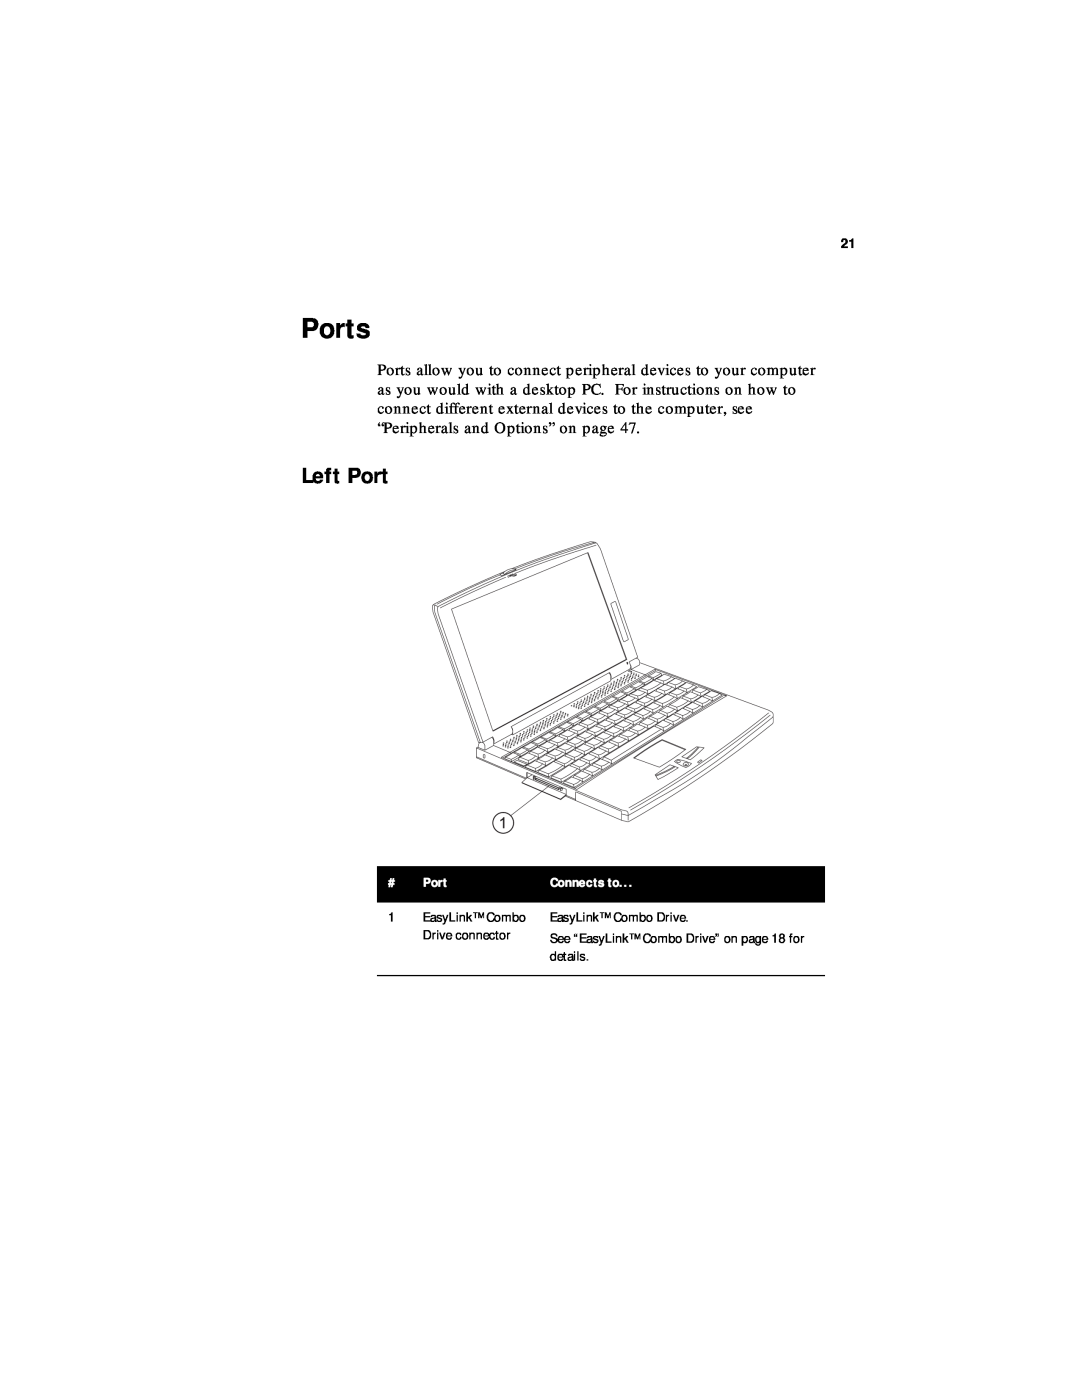 Acer 330 Series manual Ports, Left Port, Connects to, See “EasyLink Combo Drive” on page 18 for 